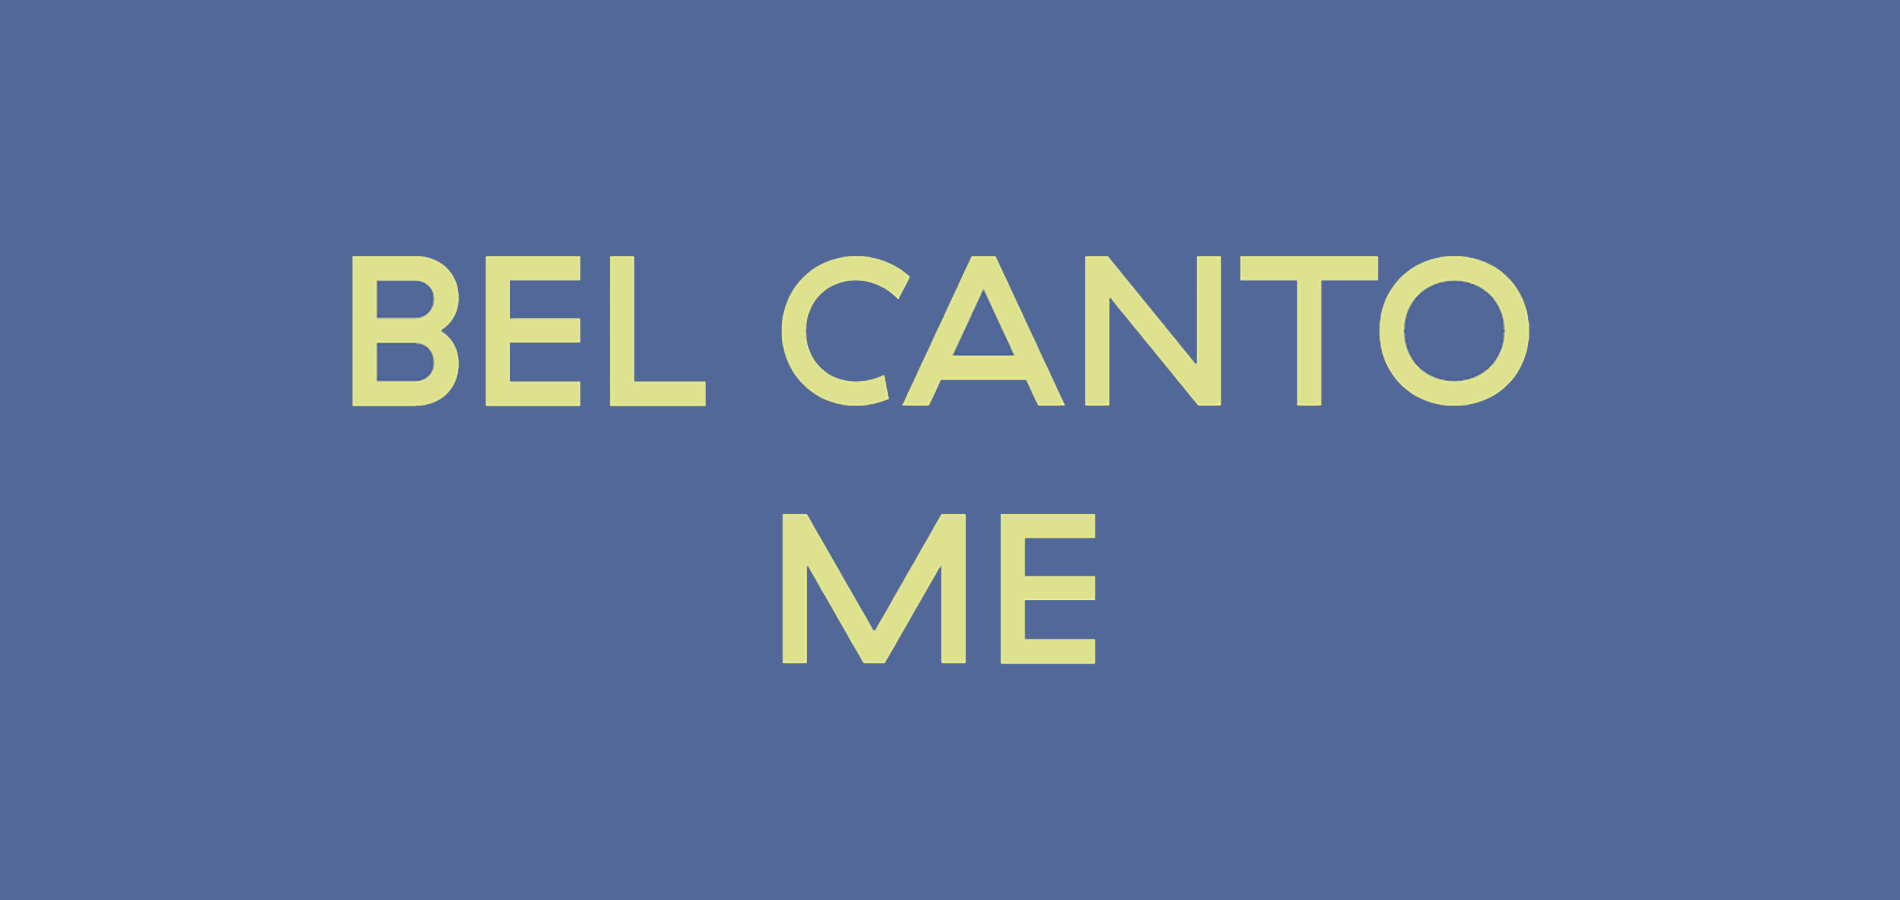 Bel Canto Me